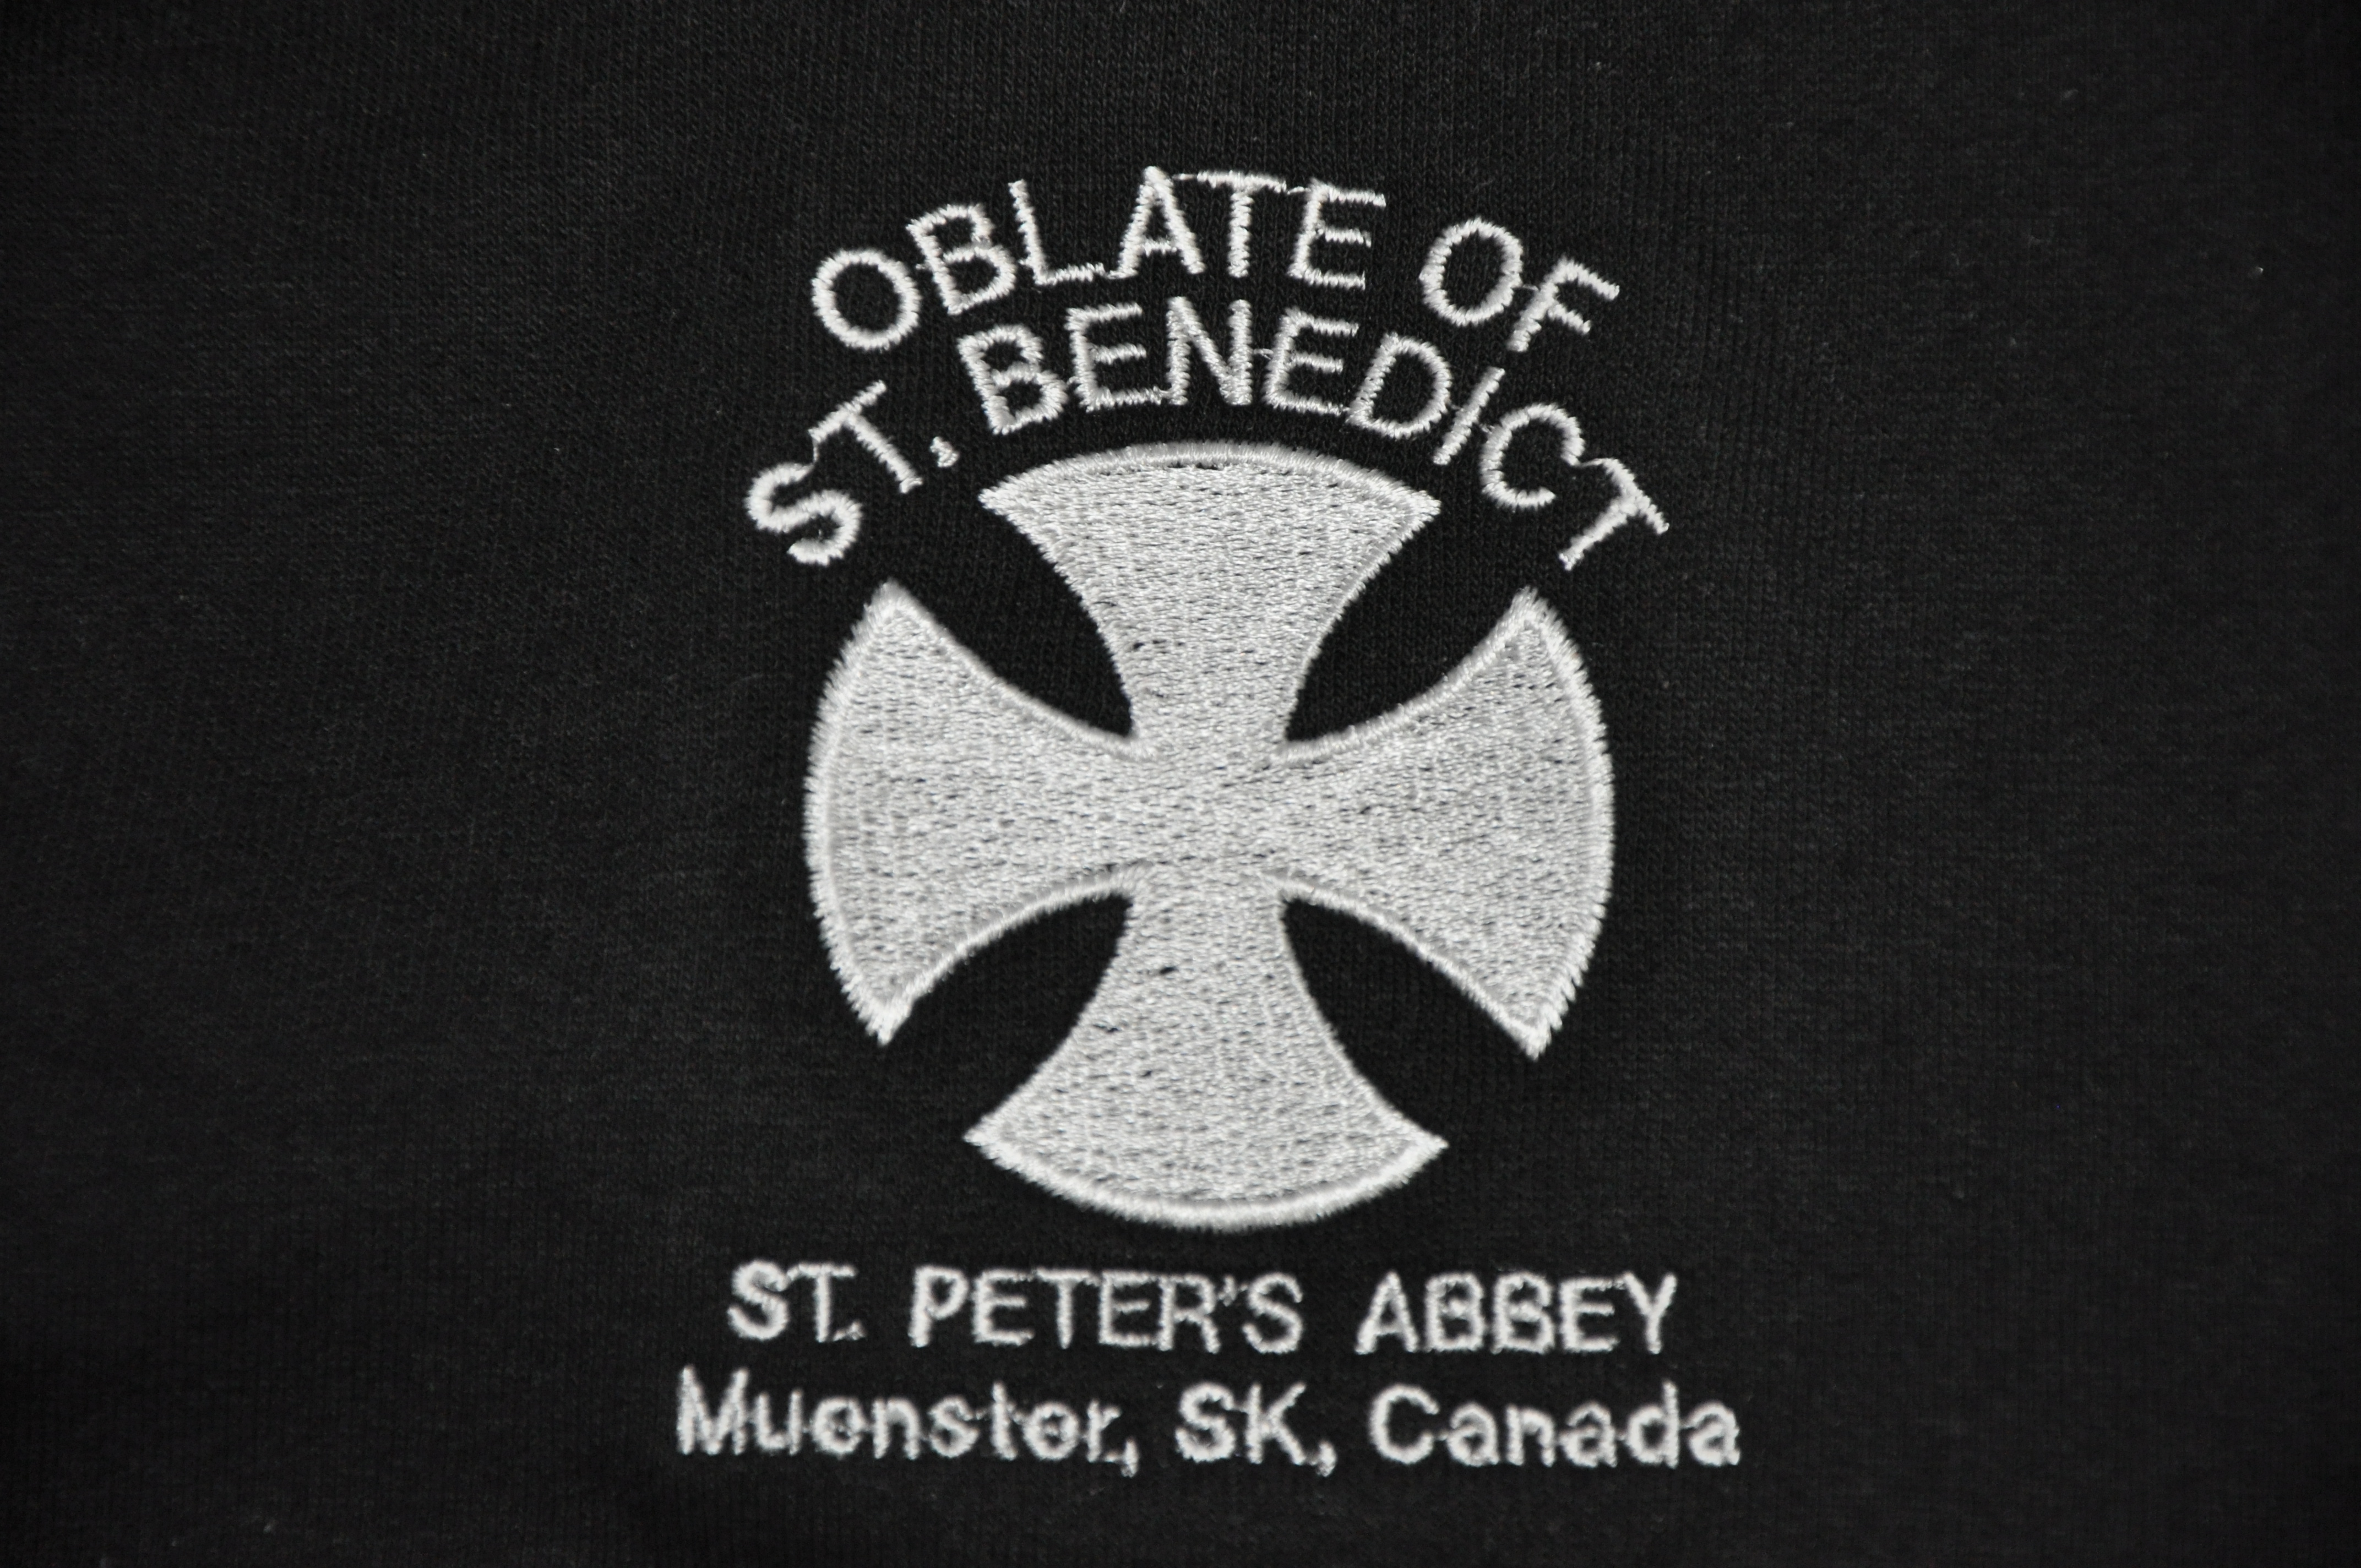 Crest of the Oblates of St. Benedict of St. Peter's Abbey, Muenster, SK, Canada, SOK-2Y0